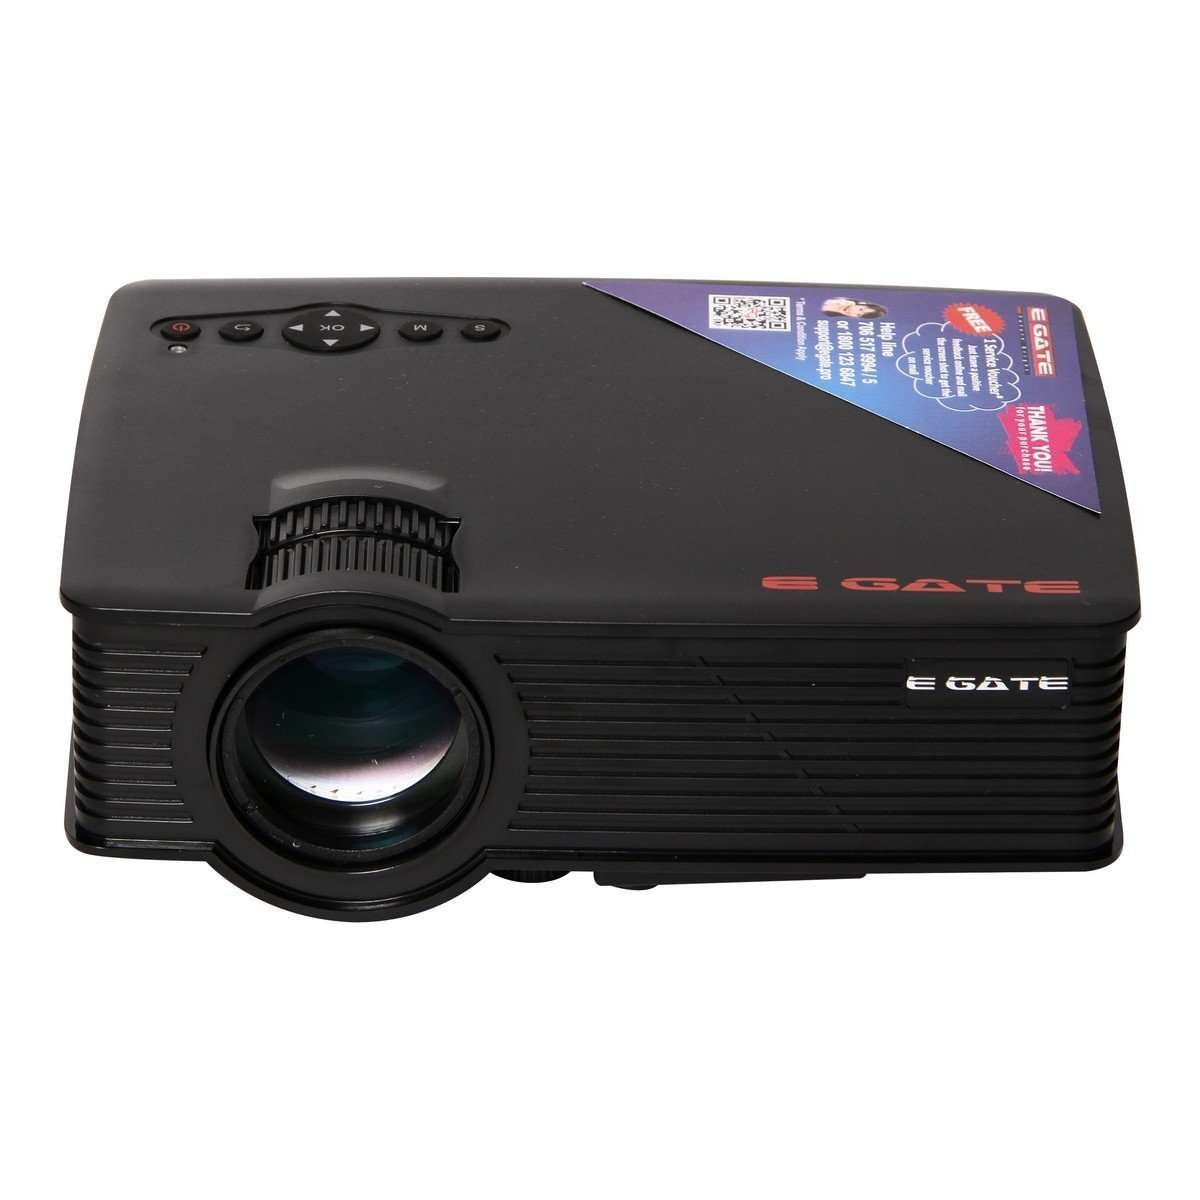 best projector to buy in india